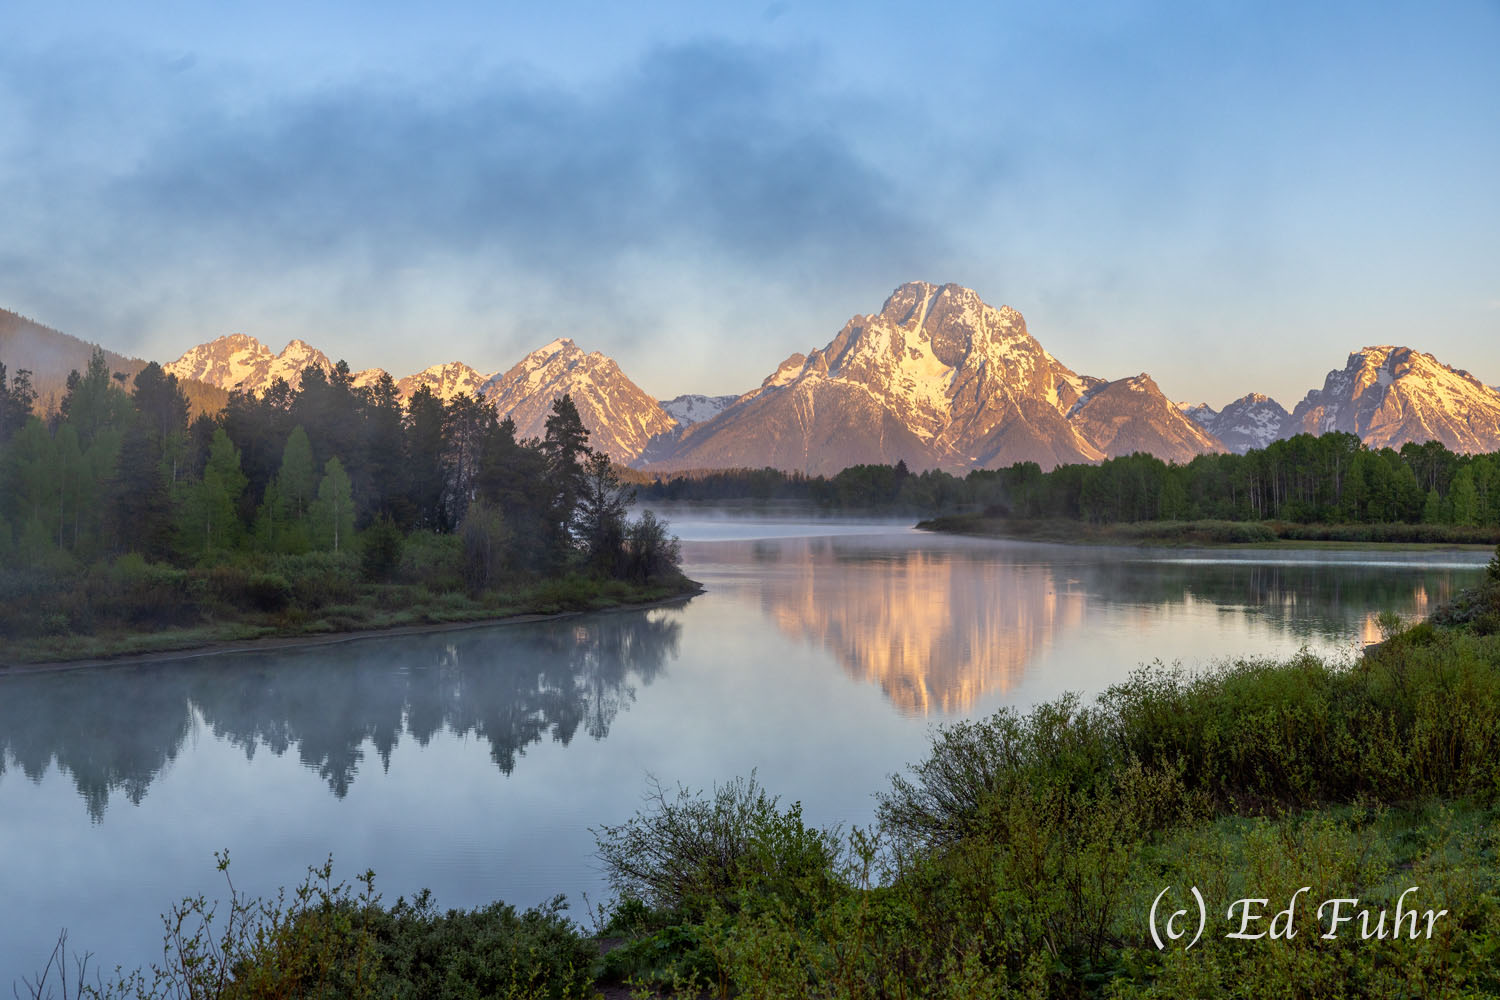 Wisps of fog lift above the slow-moving waters at Oxbow Bend.